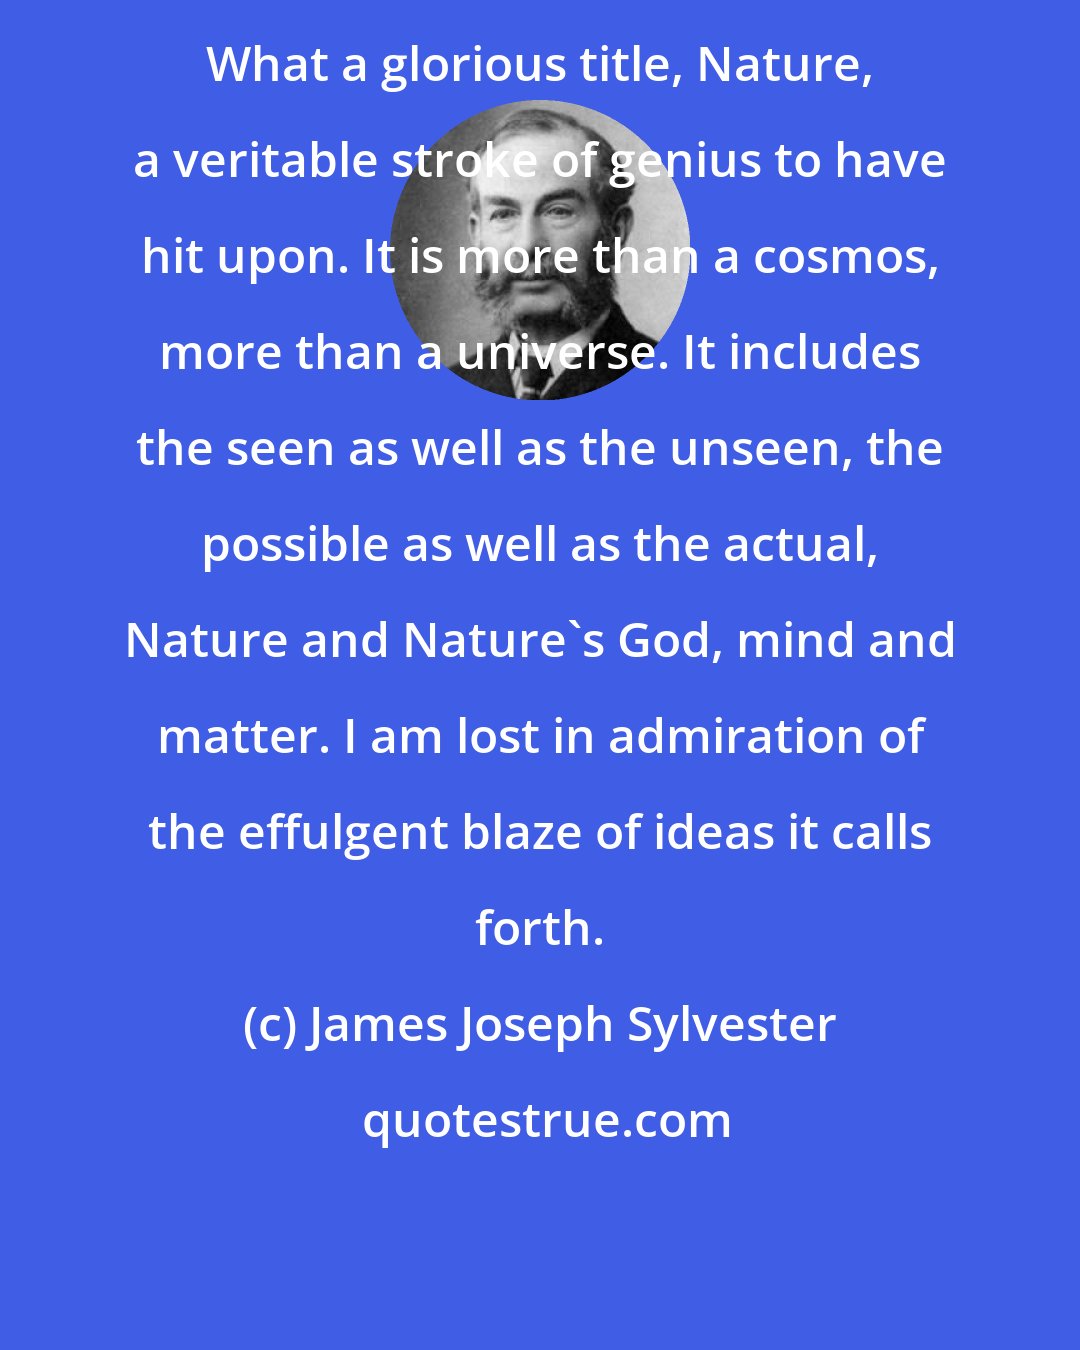 James Joseph Sylvester: What a glorious title, Nature, a veritable stroke of genius to have hit upon. It is more than a cosmos, more than a universe. It includes the seen as well as the unseen, the possible as well as the actual, Nature and Nature's God, mind and matter. I am lost in admiration of the effulgent blaze of ideas it calls forth.